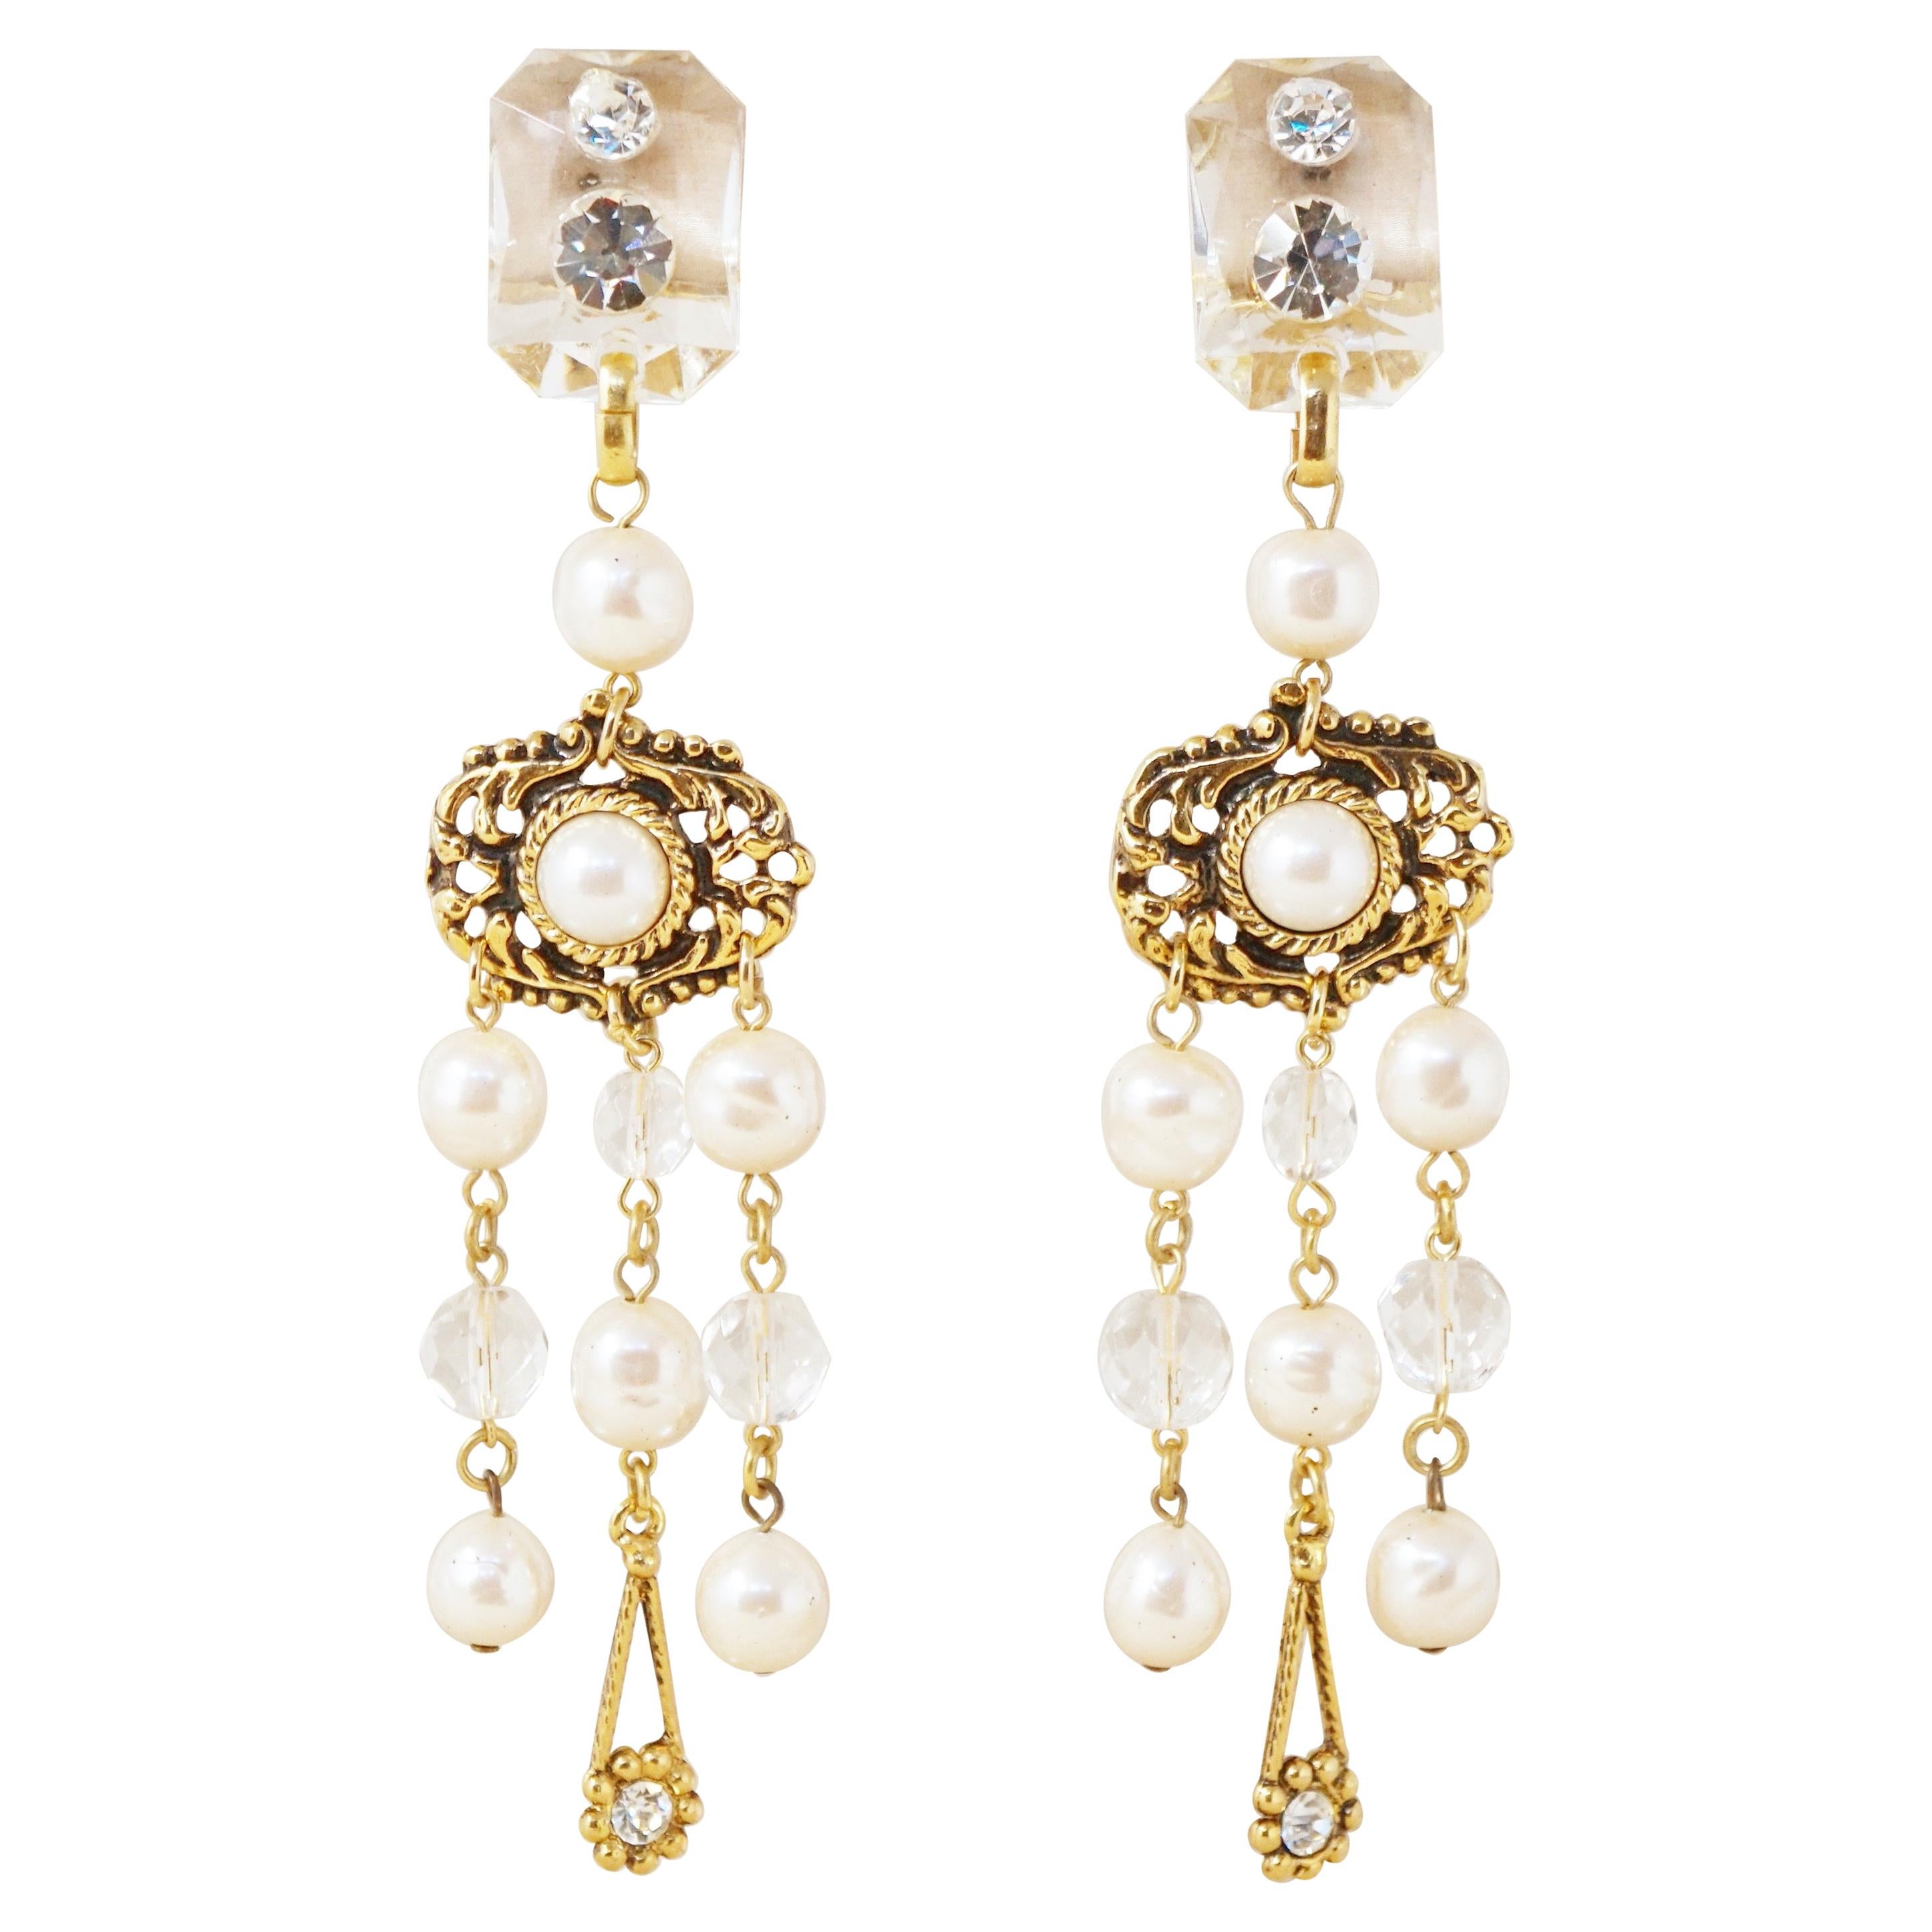 Vintage Lucite, Crystal & Pearl Chandelier Earrings by Gianni De Liguoro, 1980s For Sale